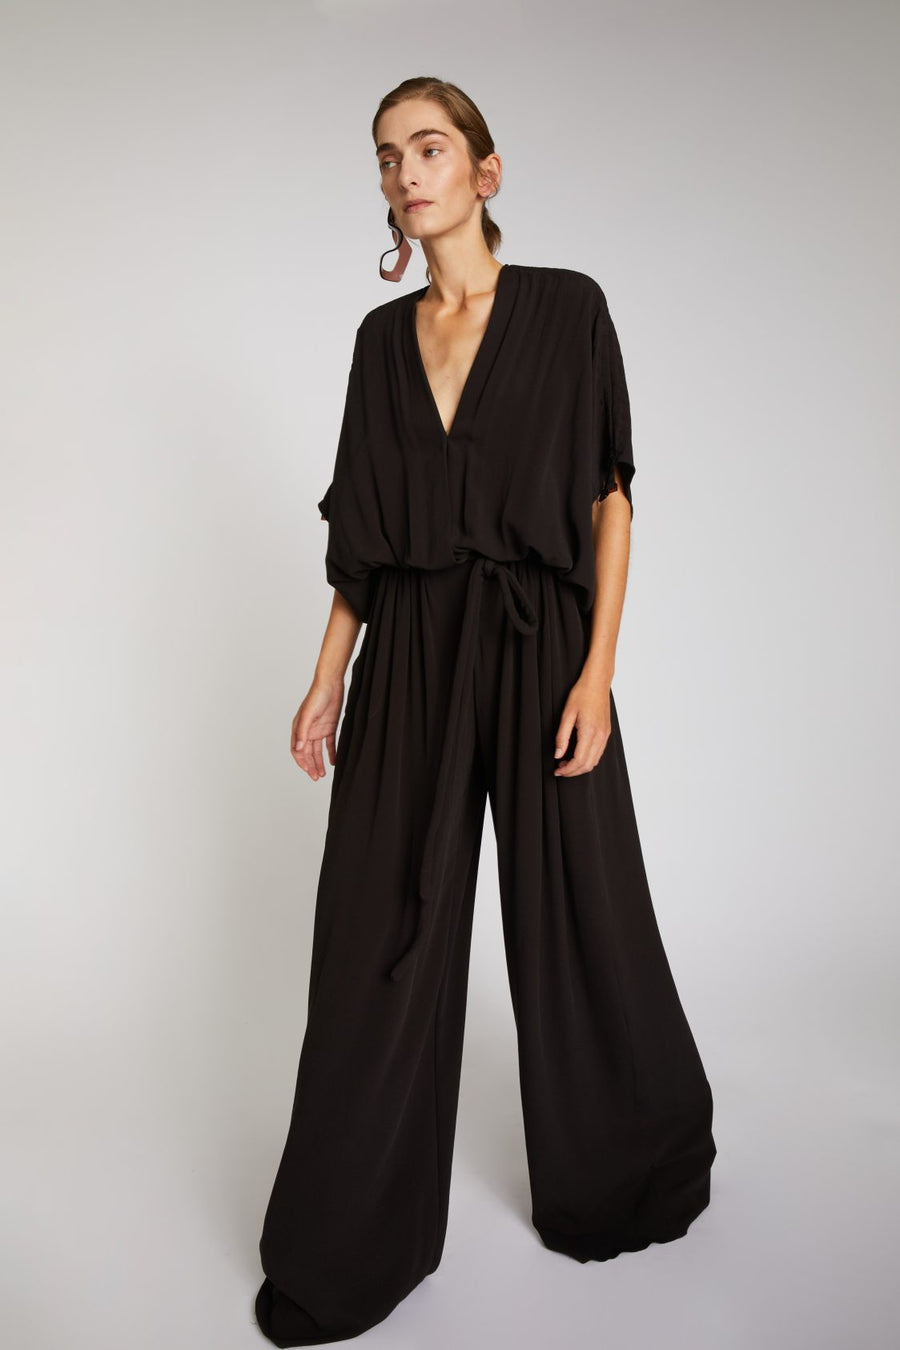 VERONIQUE LEROY - Gathered Jumpsuit in Choco